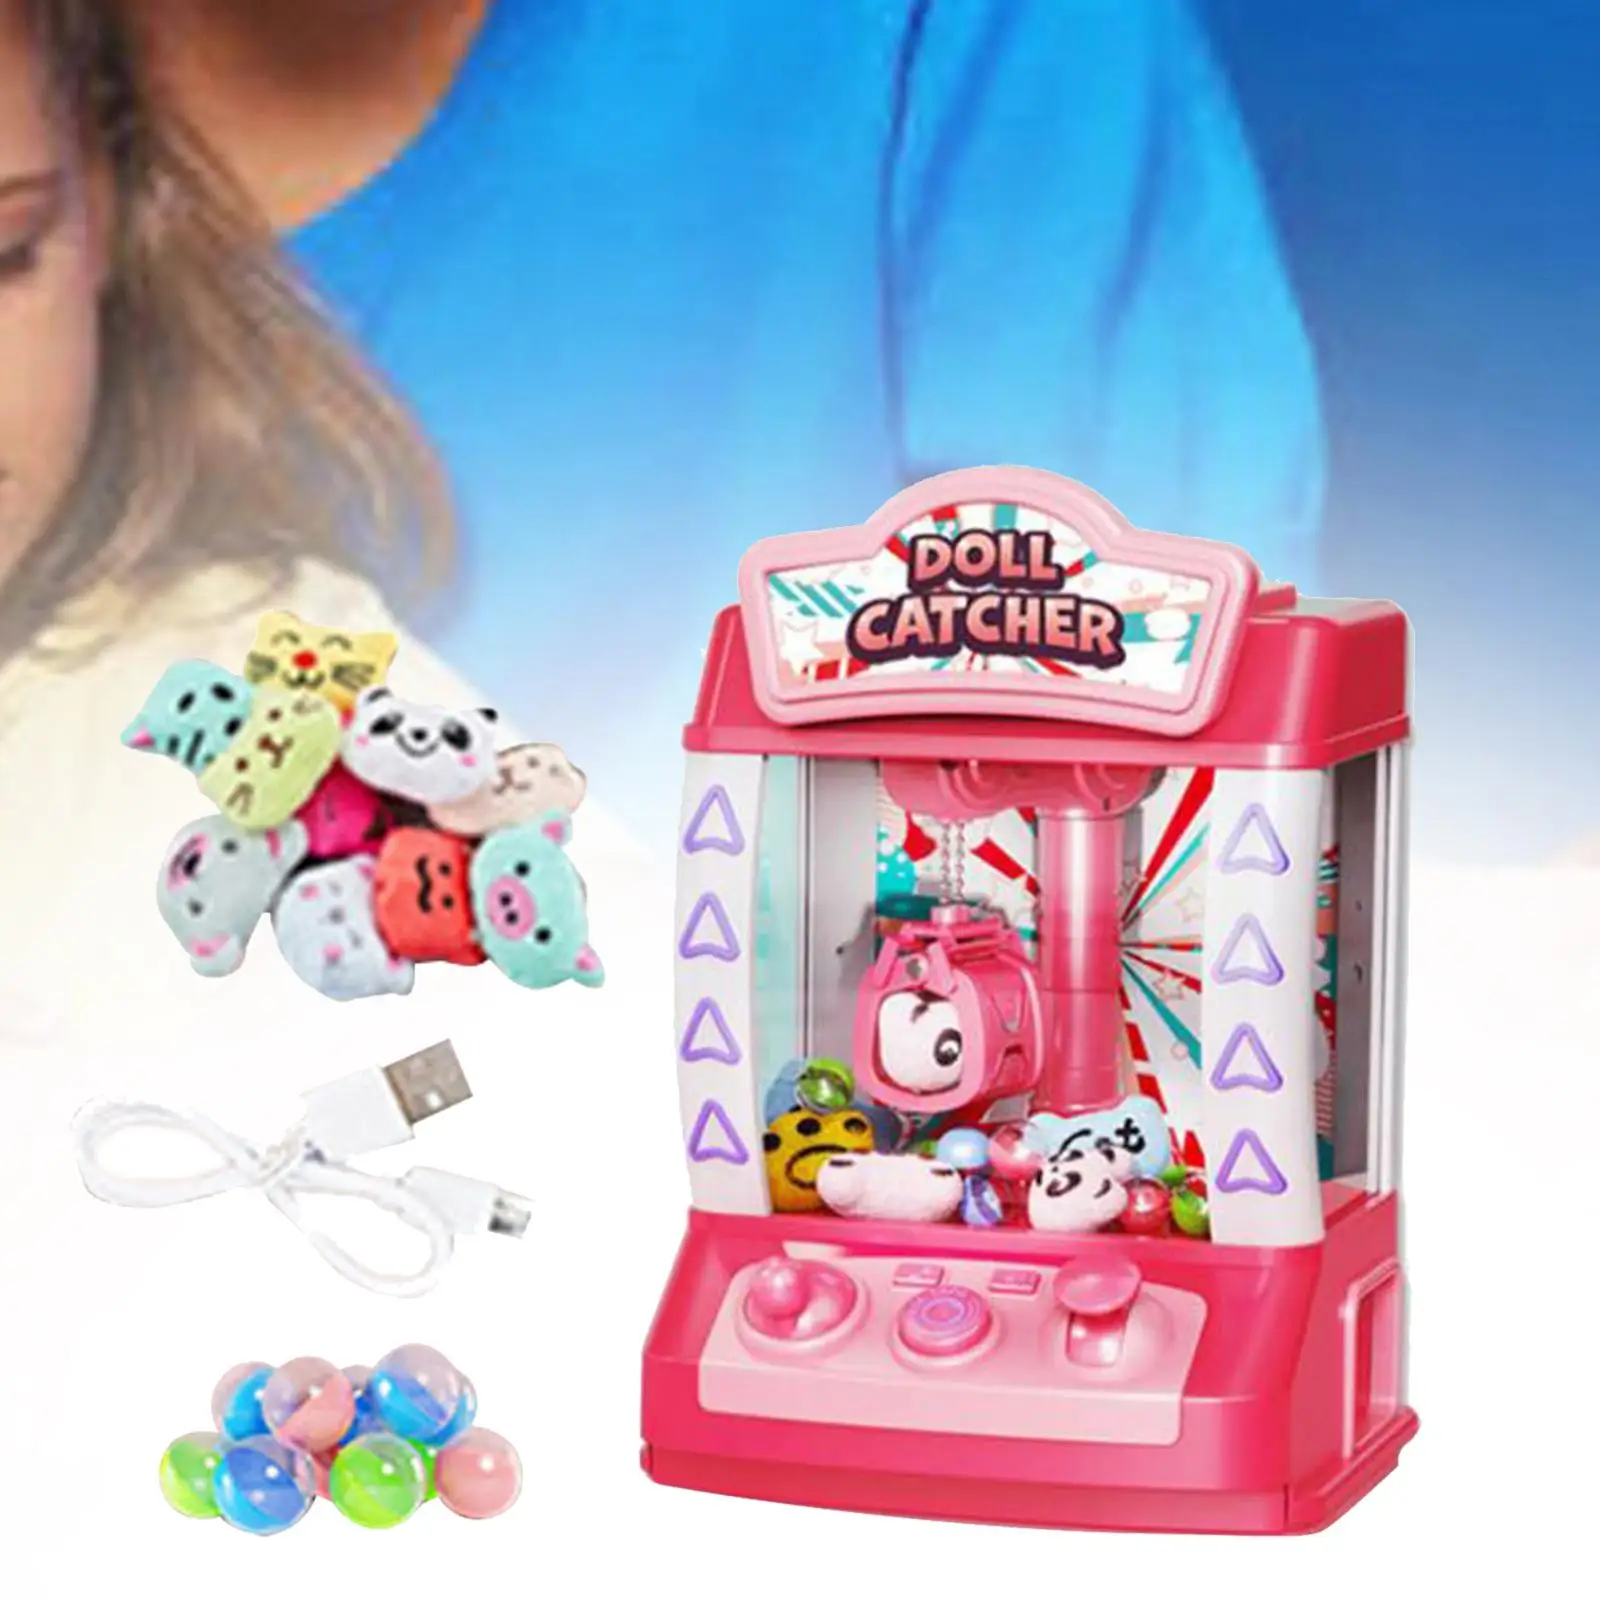 Claw Machine, Mini Vending Machine, Arcade Candy Capsule Claw Game Prizes Toy, Electronic Small Toys for Home, Adults, Kids